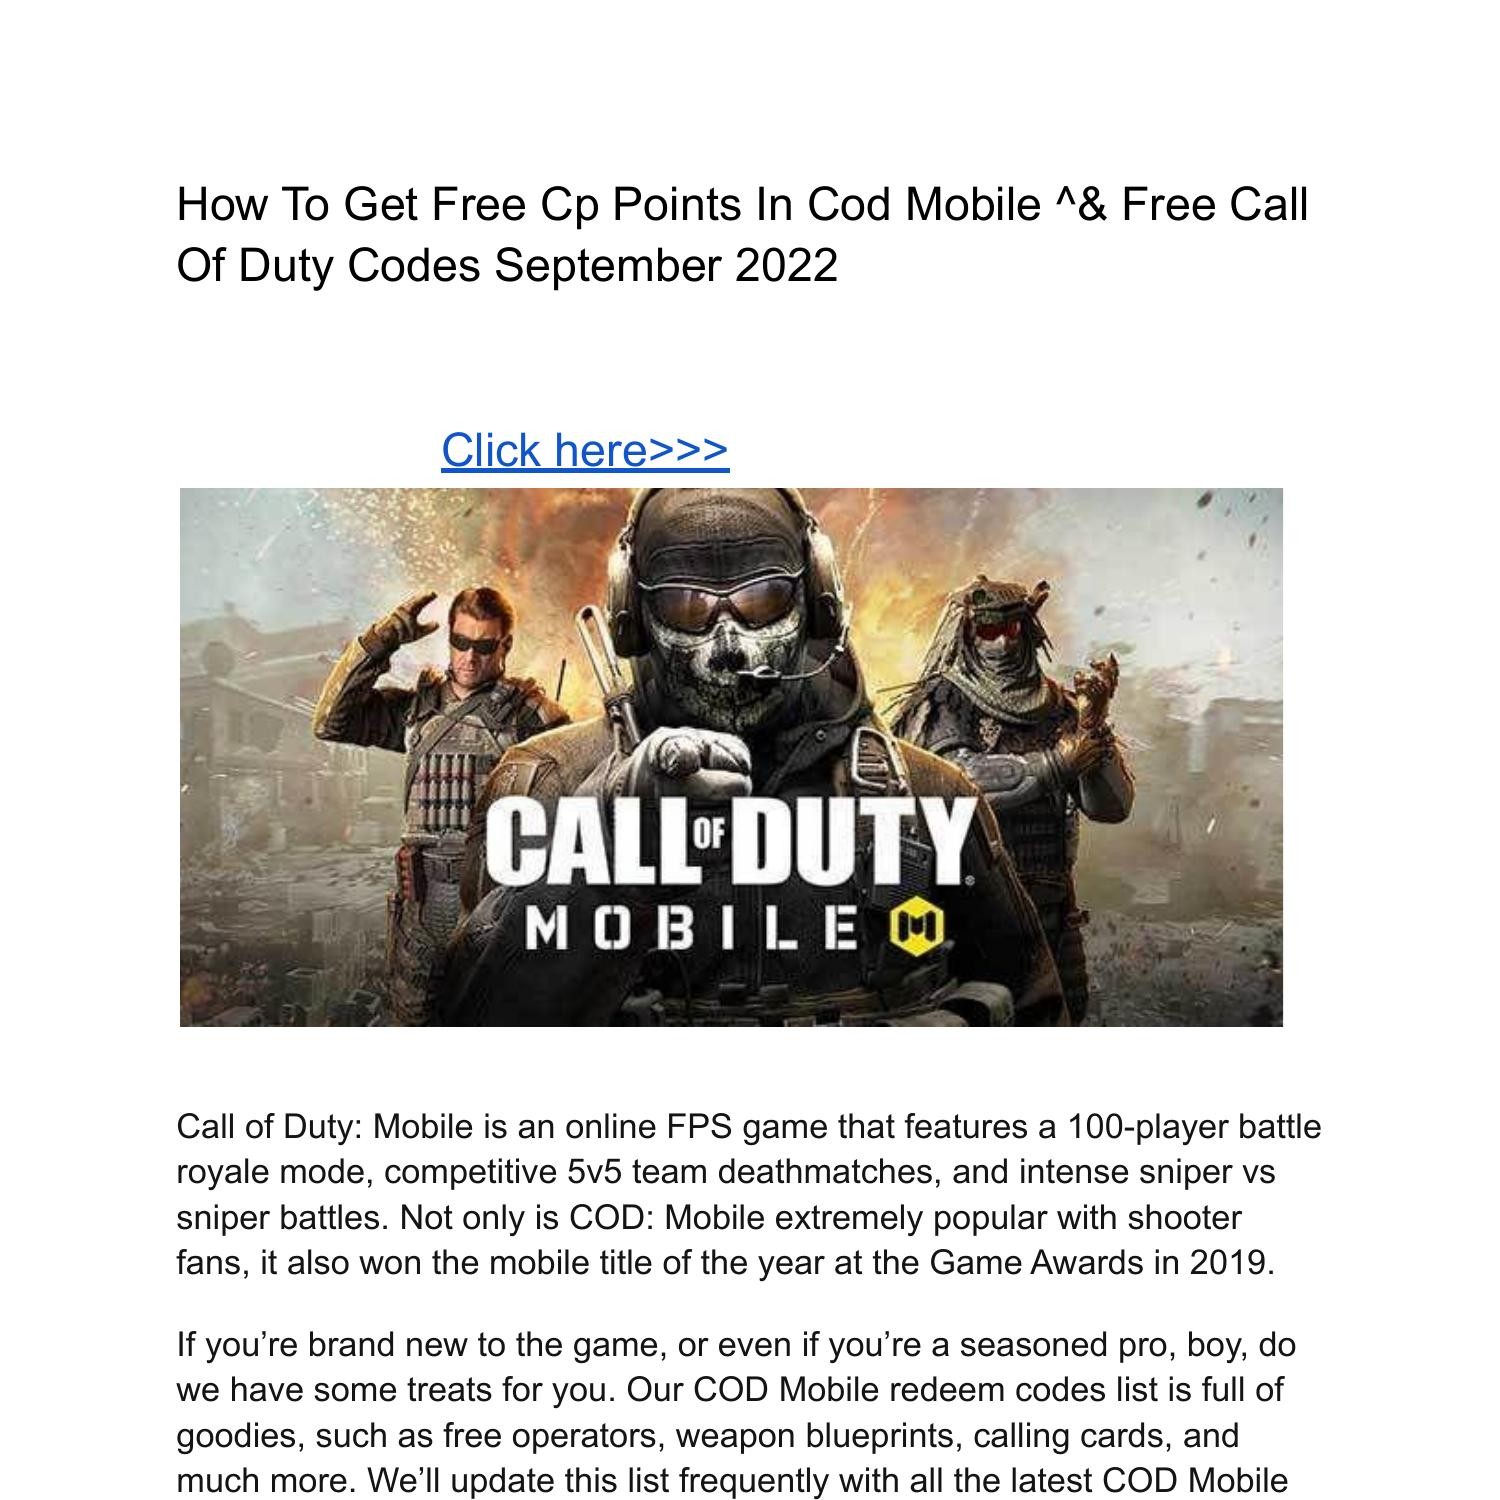 How To Get Free Cp Points In Cod Mobile ^& Free Call Of Duty Codes  September 2022.pdf